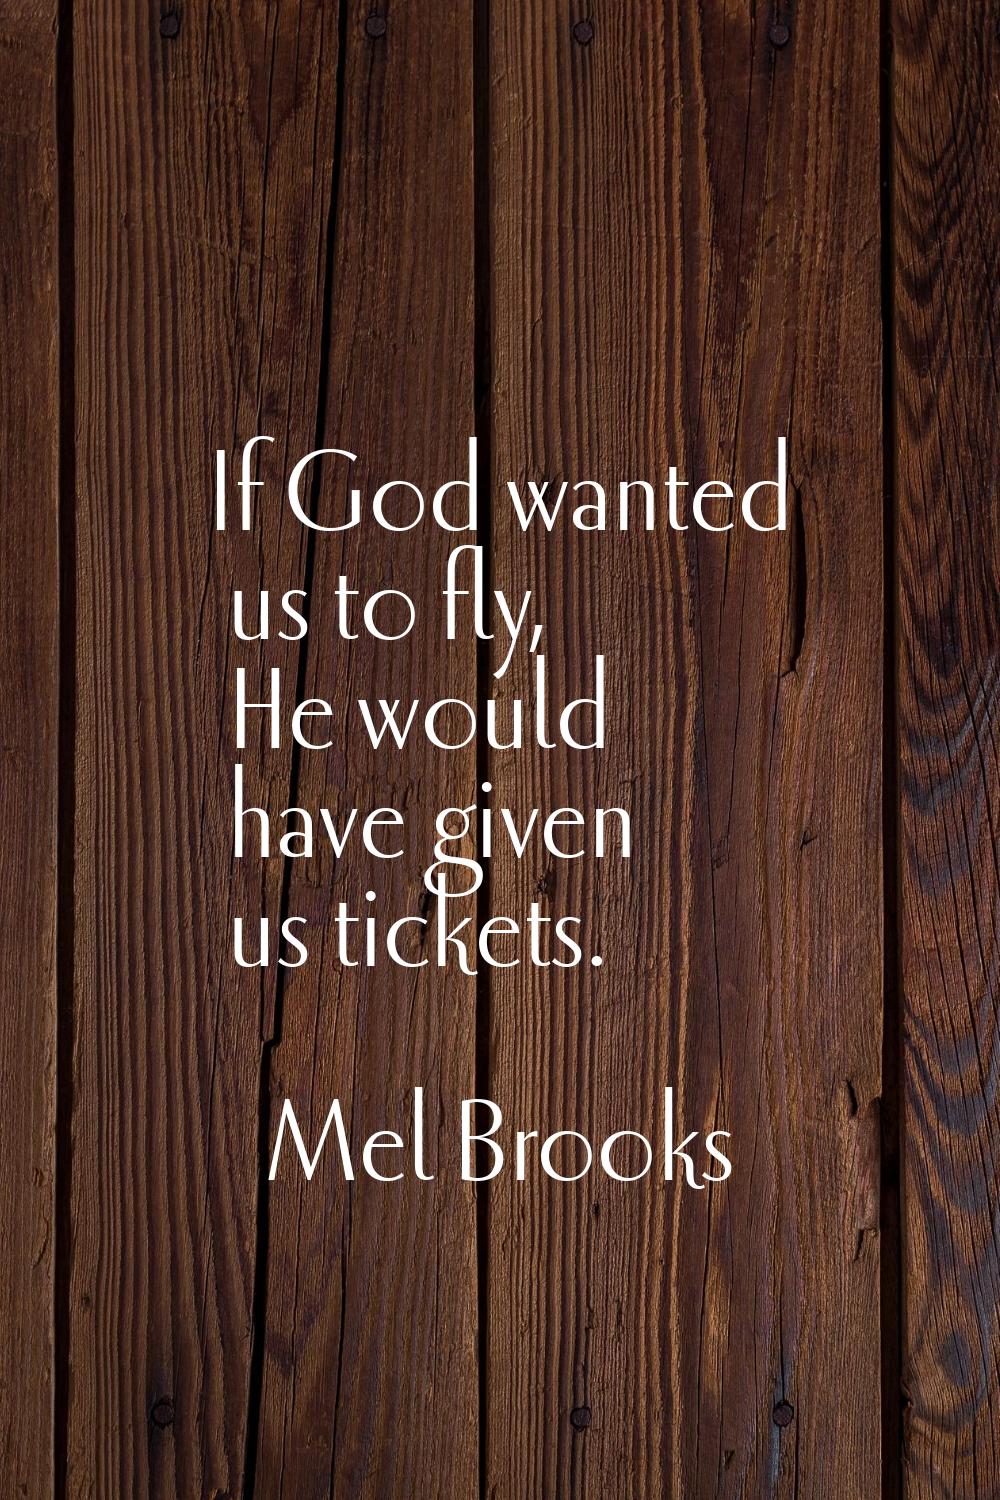 If God wanted us to fly, He would have given us tickets.